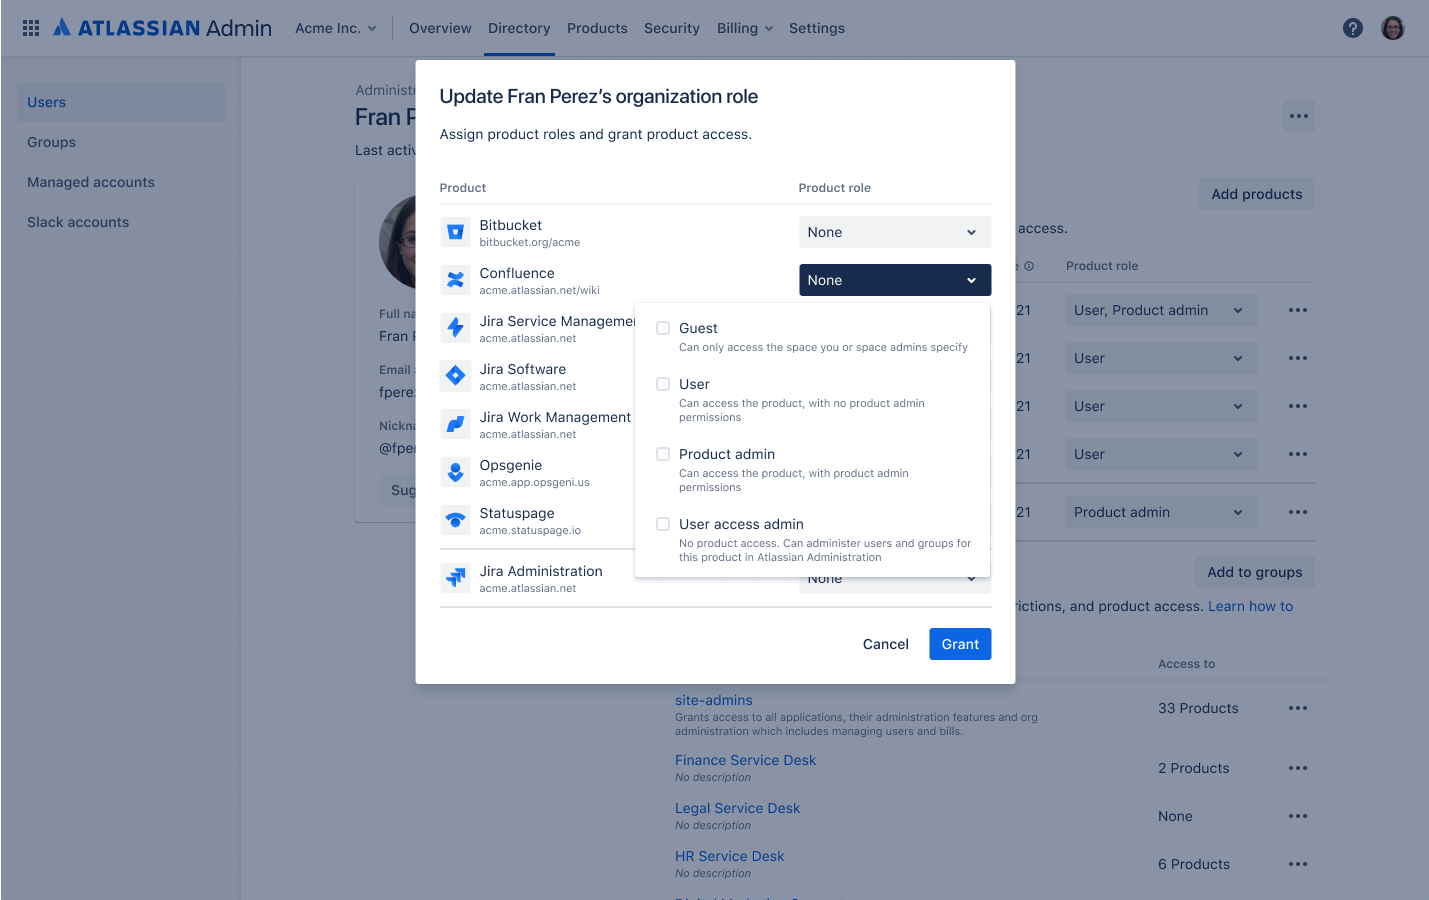 User details page, select add products, assign the user access admin role for Confluence